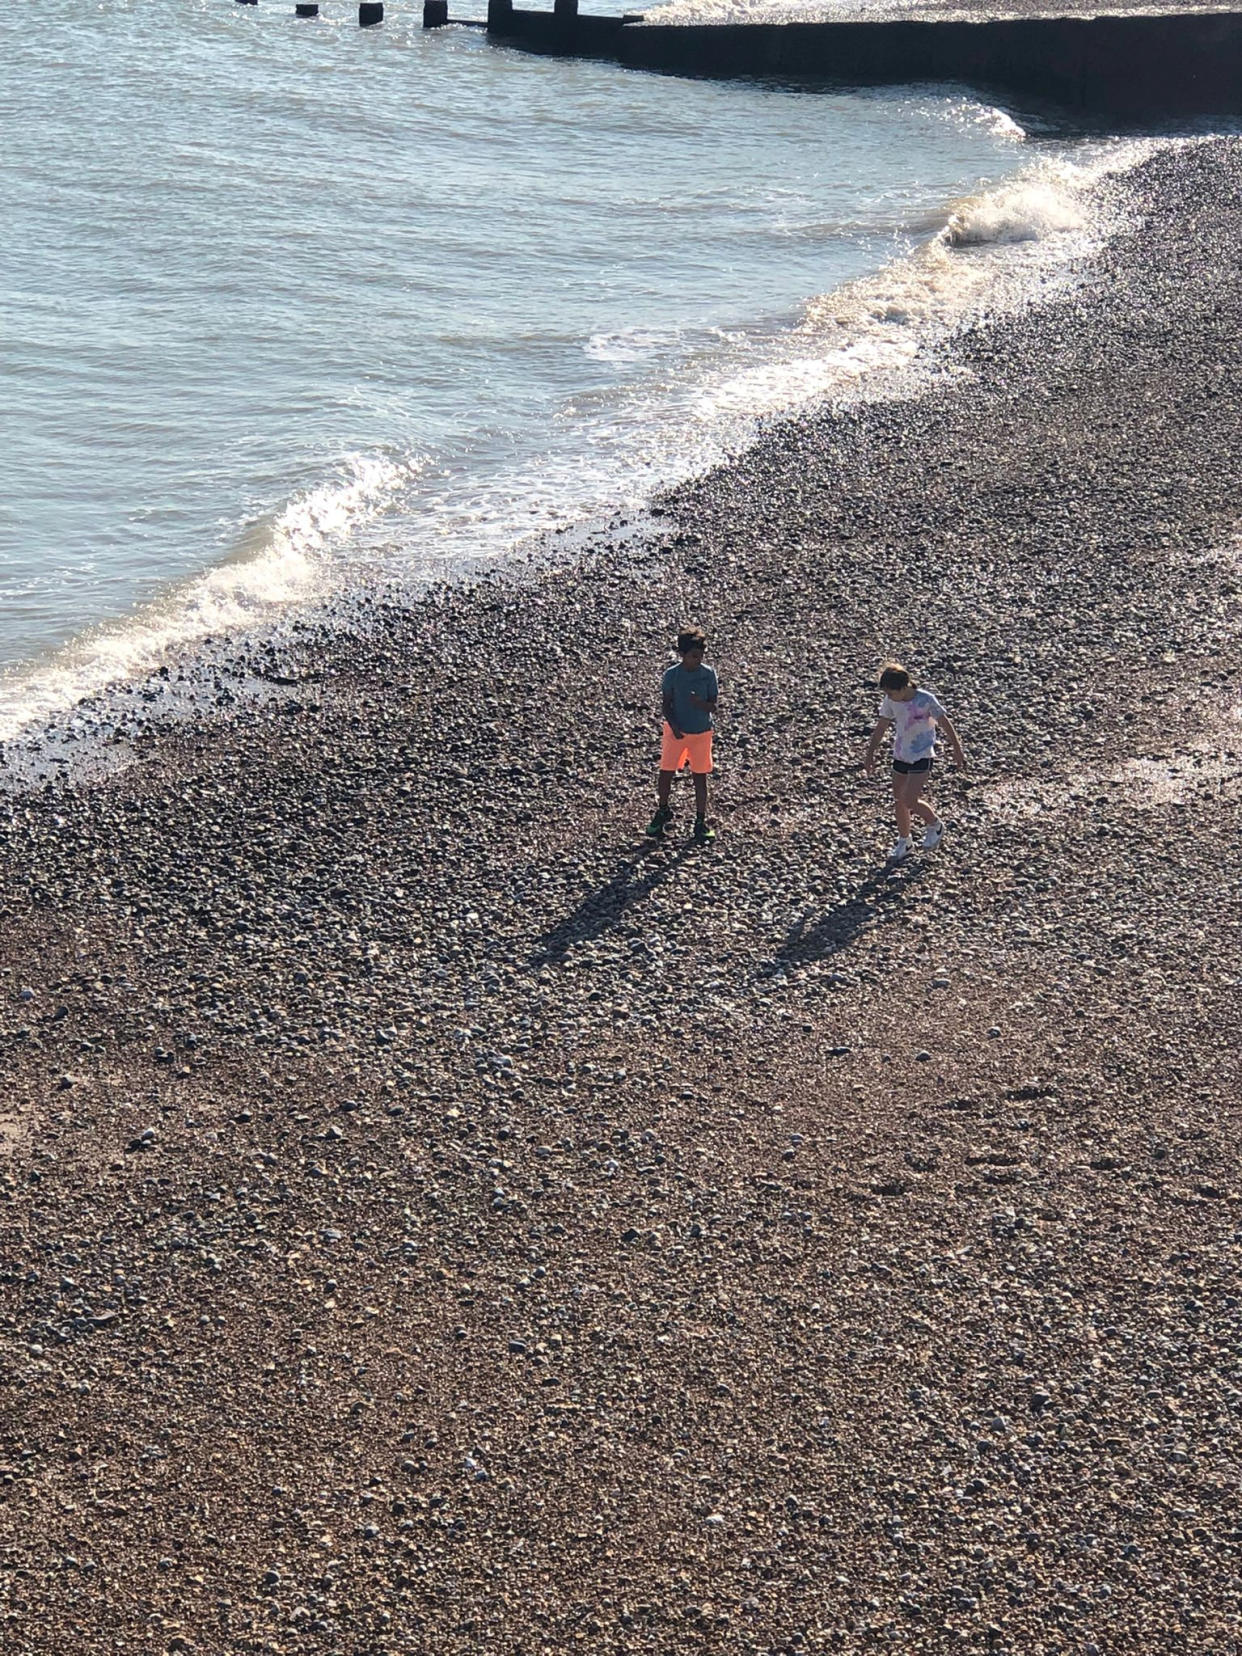 Oliver Quarte with a friend on the beach near Hastings before the incident (SWNS)